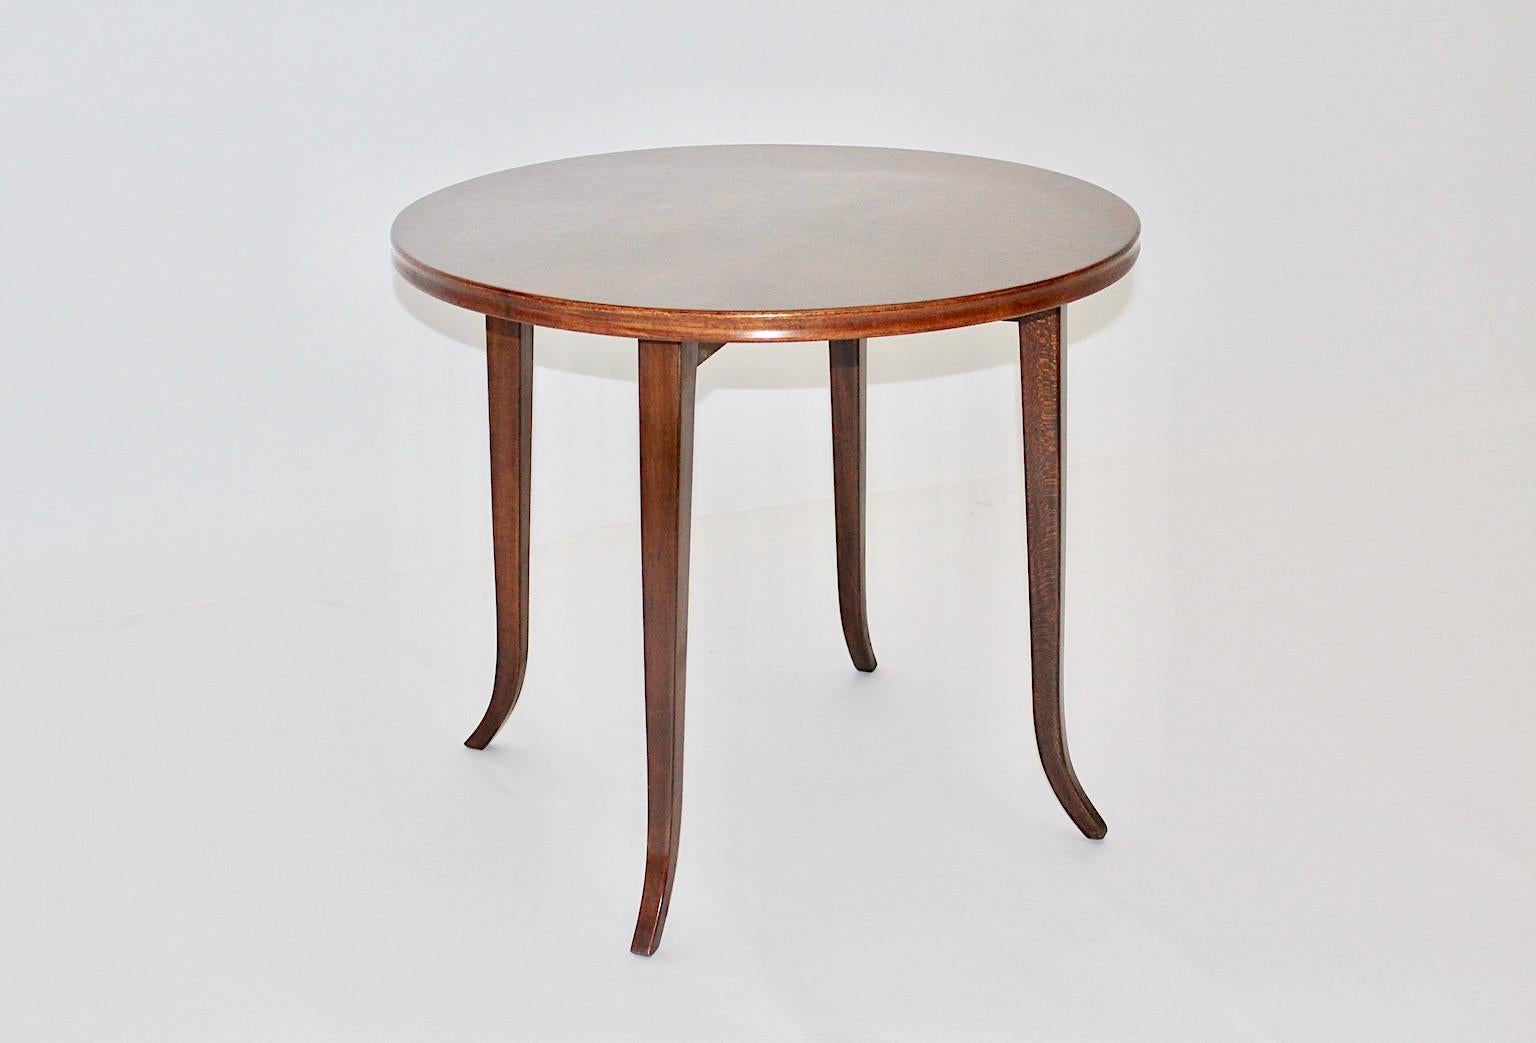 Josef Frank walnut vintage round shape coffee table, which was designed and manufactured 1930s for Haus & Garten, Austria.
A beautiful and elegant circular shape of the coffee table, which fit to your home interior throughout its warm brown walnut